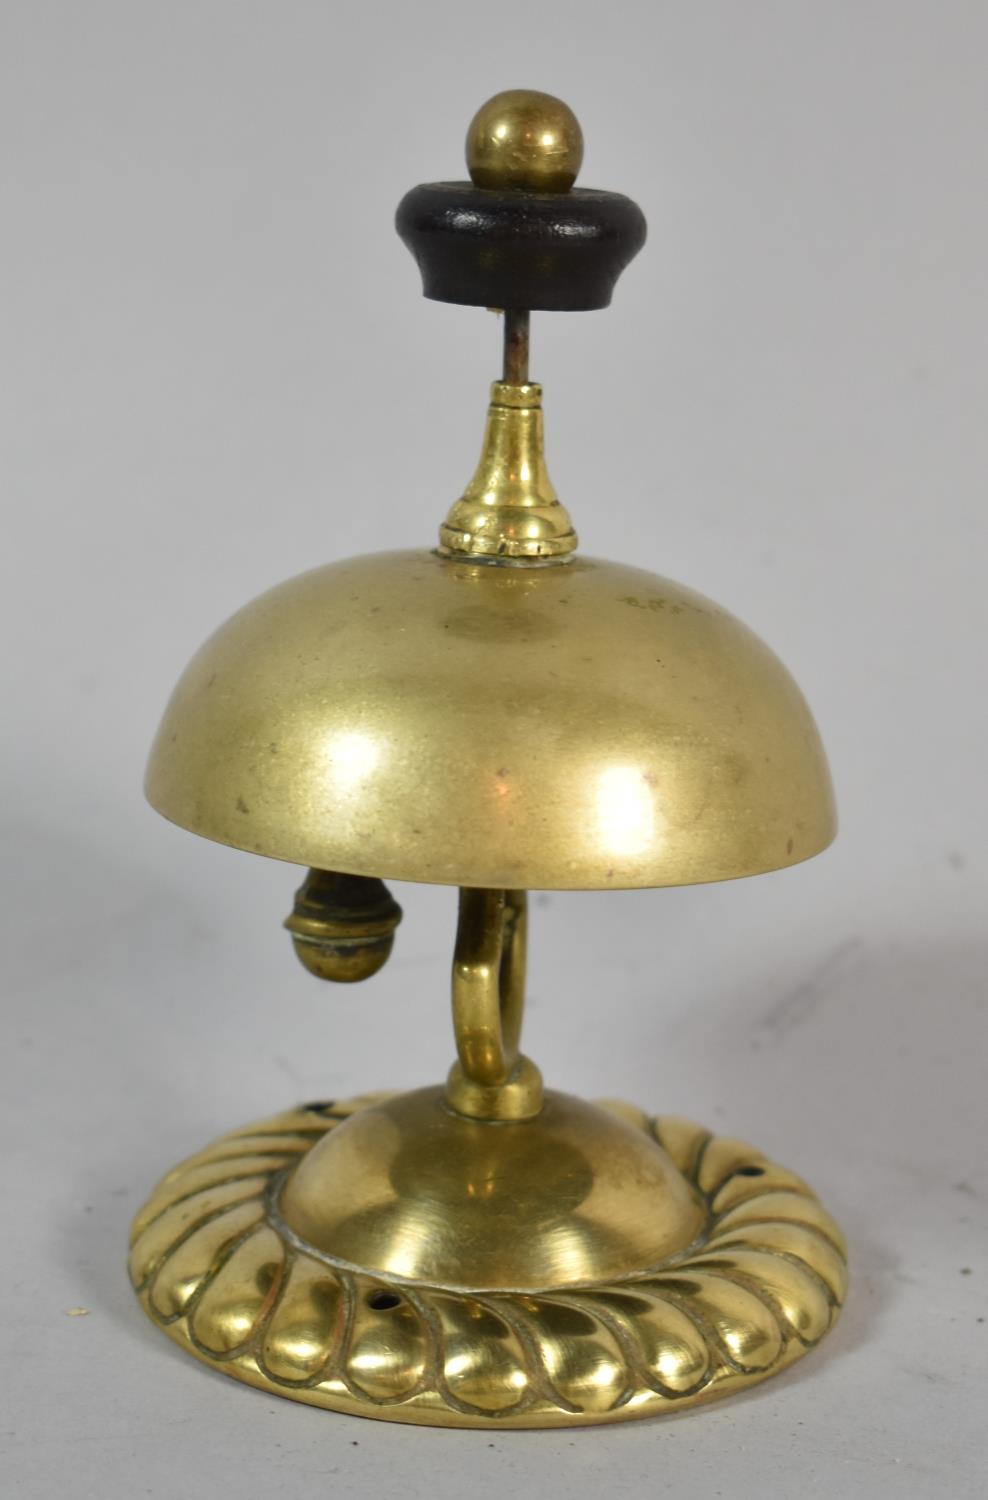 A Late 19th/Early 20th Century Brass Reception Counter Bell, 13cm high